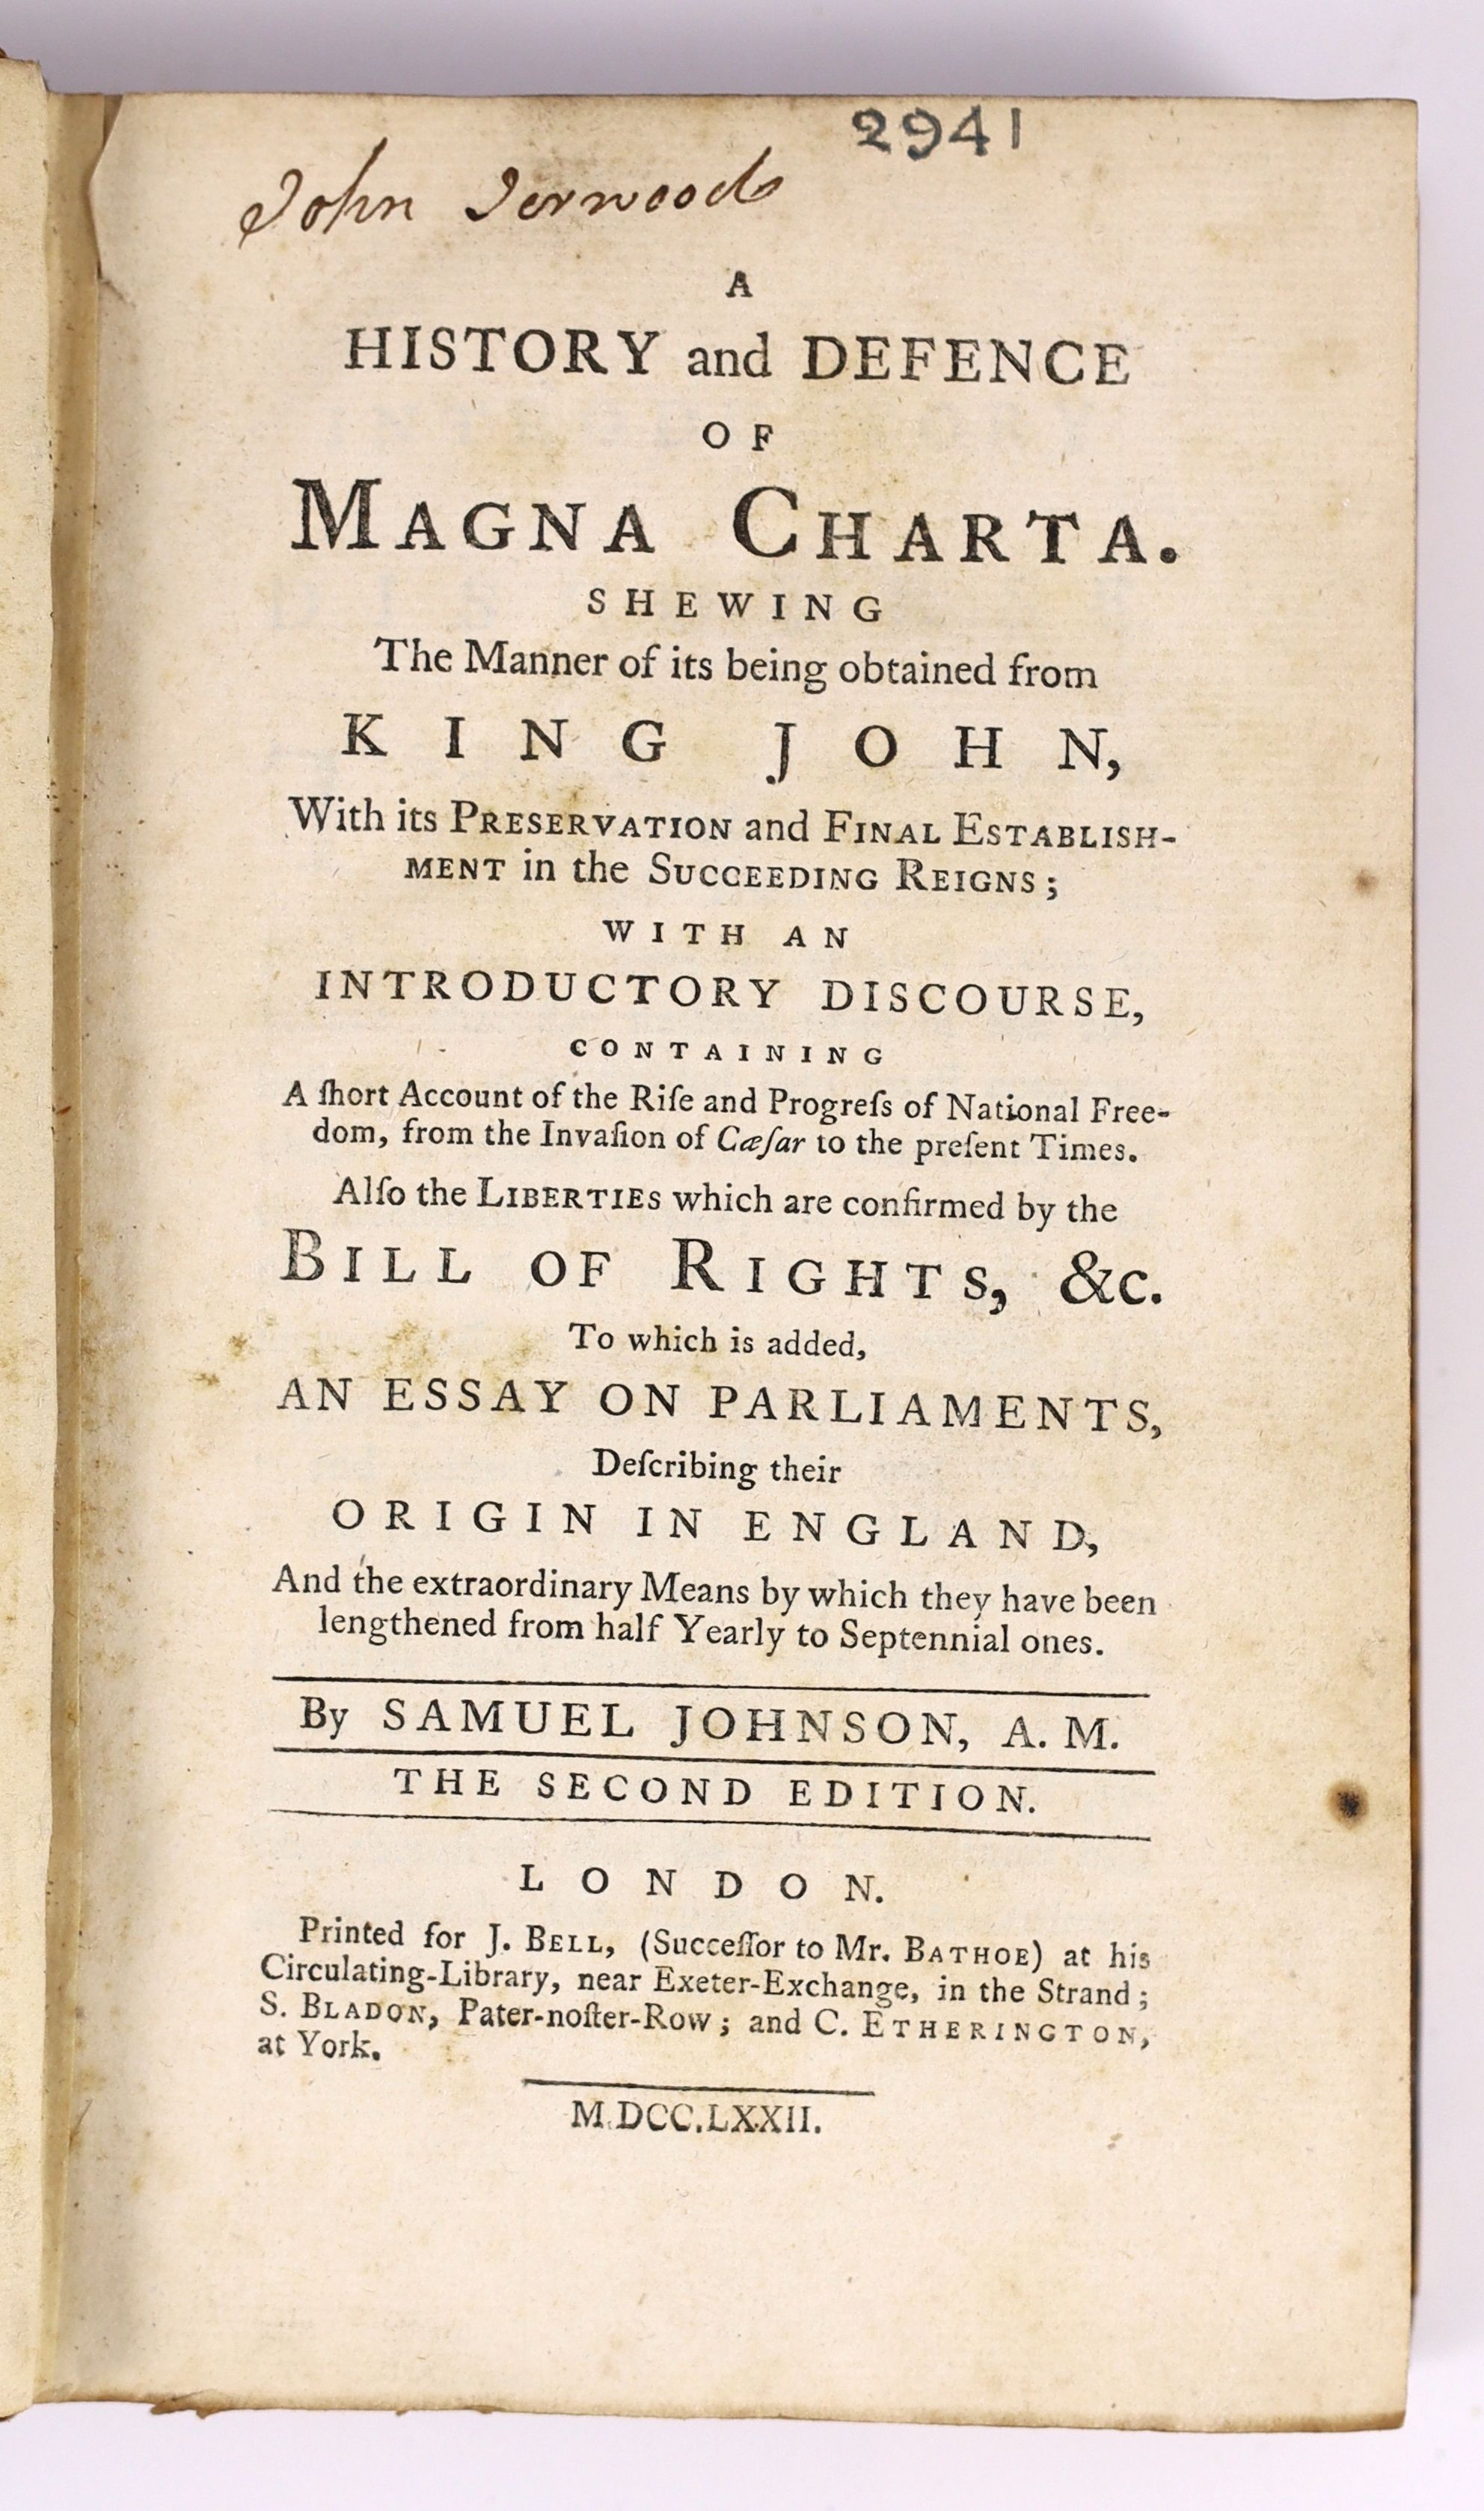 Johnson, Samuel - A History and Defence of Magna Carta, 2nd edition, 8vo, calf, London, 1772; Creasy, Edward, Sir - The Fifteen Decisive Battles of the World, 10th edition, half calf, London, 1860 and Delaune, Thomas - A